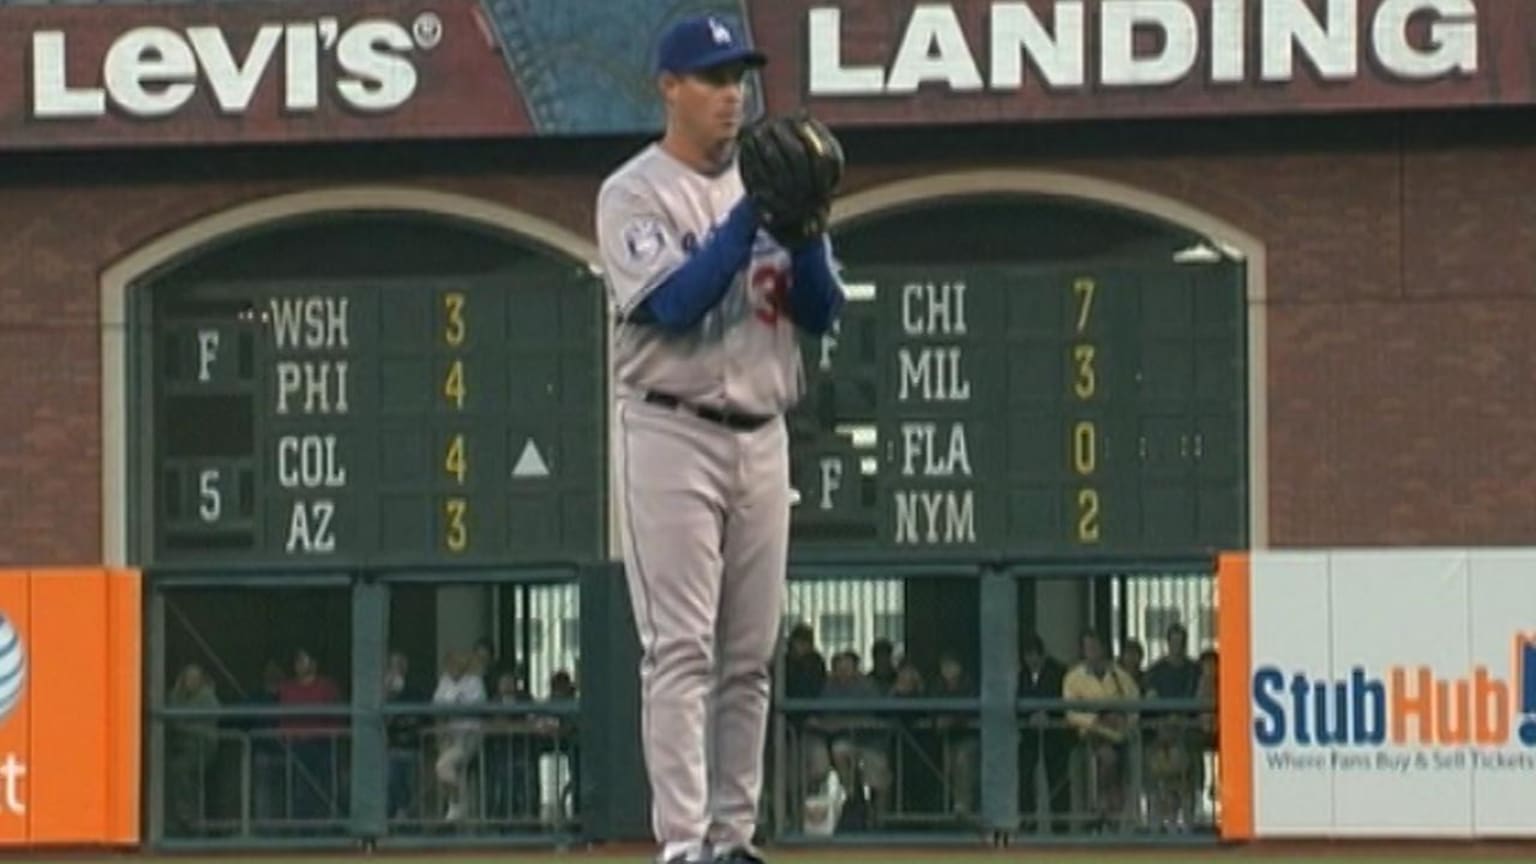 2008 Dodgers: Greg Maddux reaches 5,000 innings pitched against